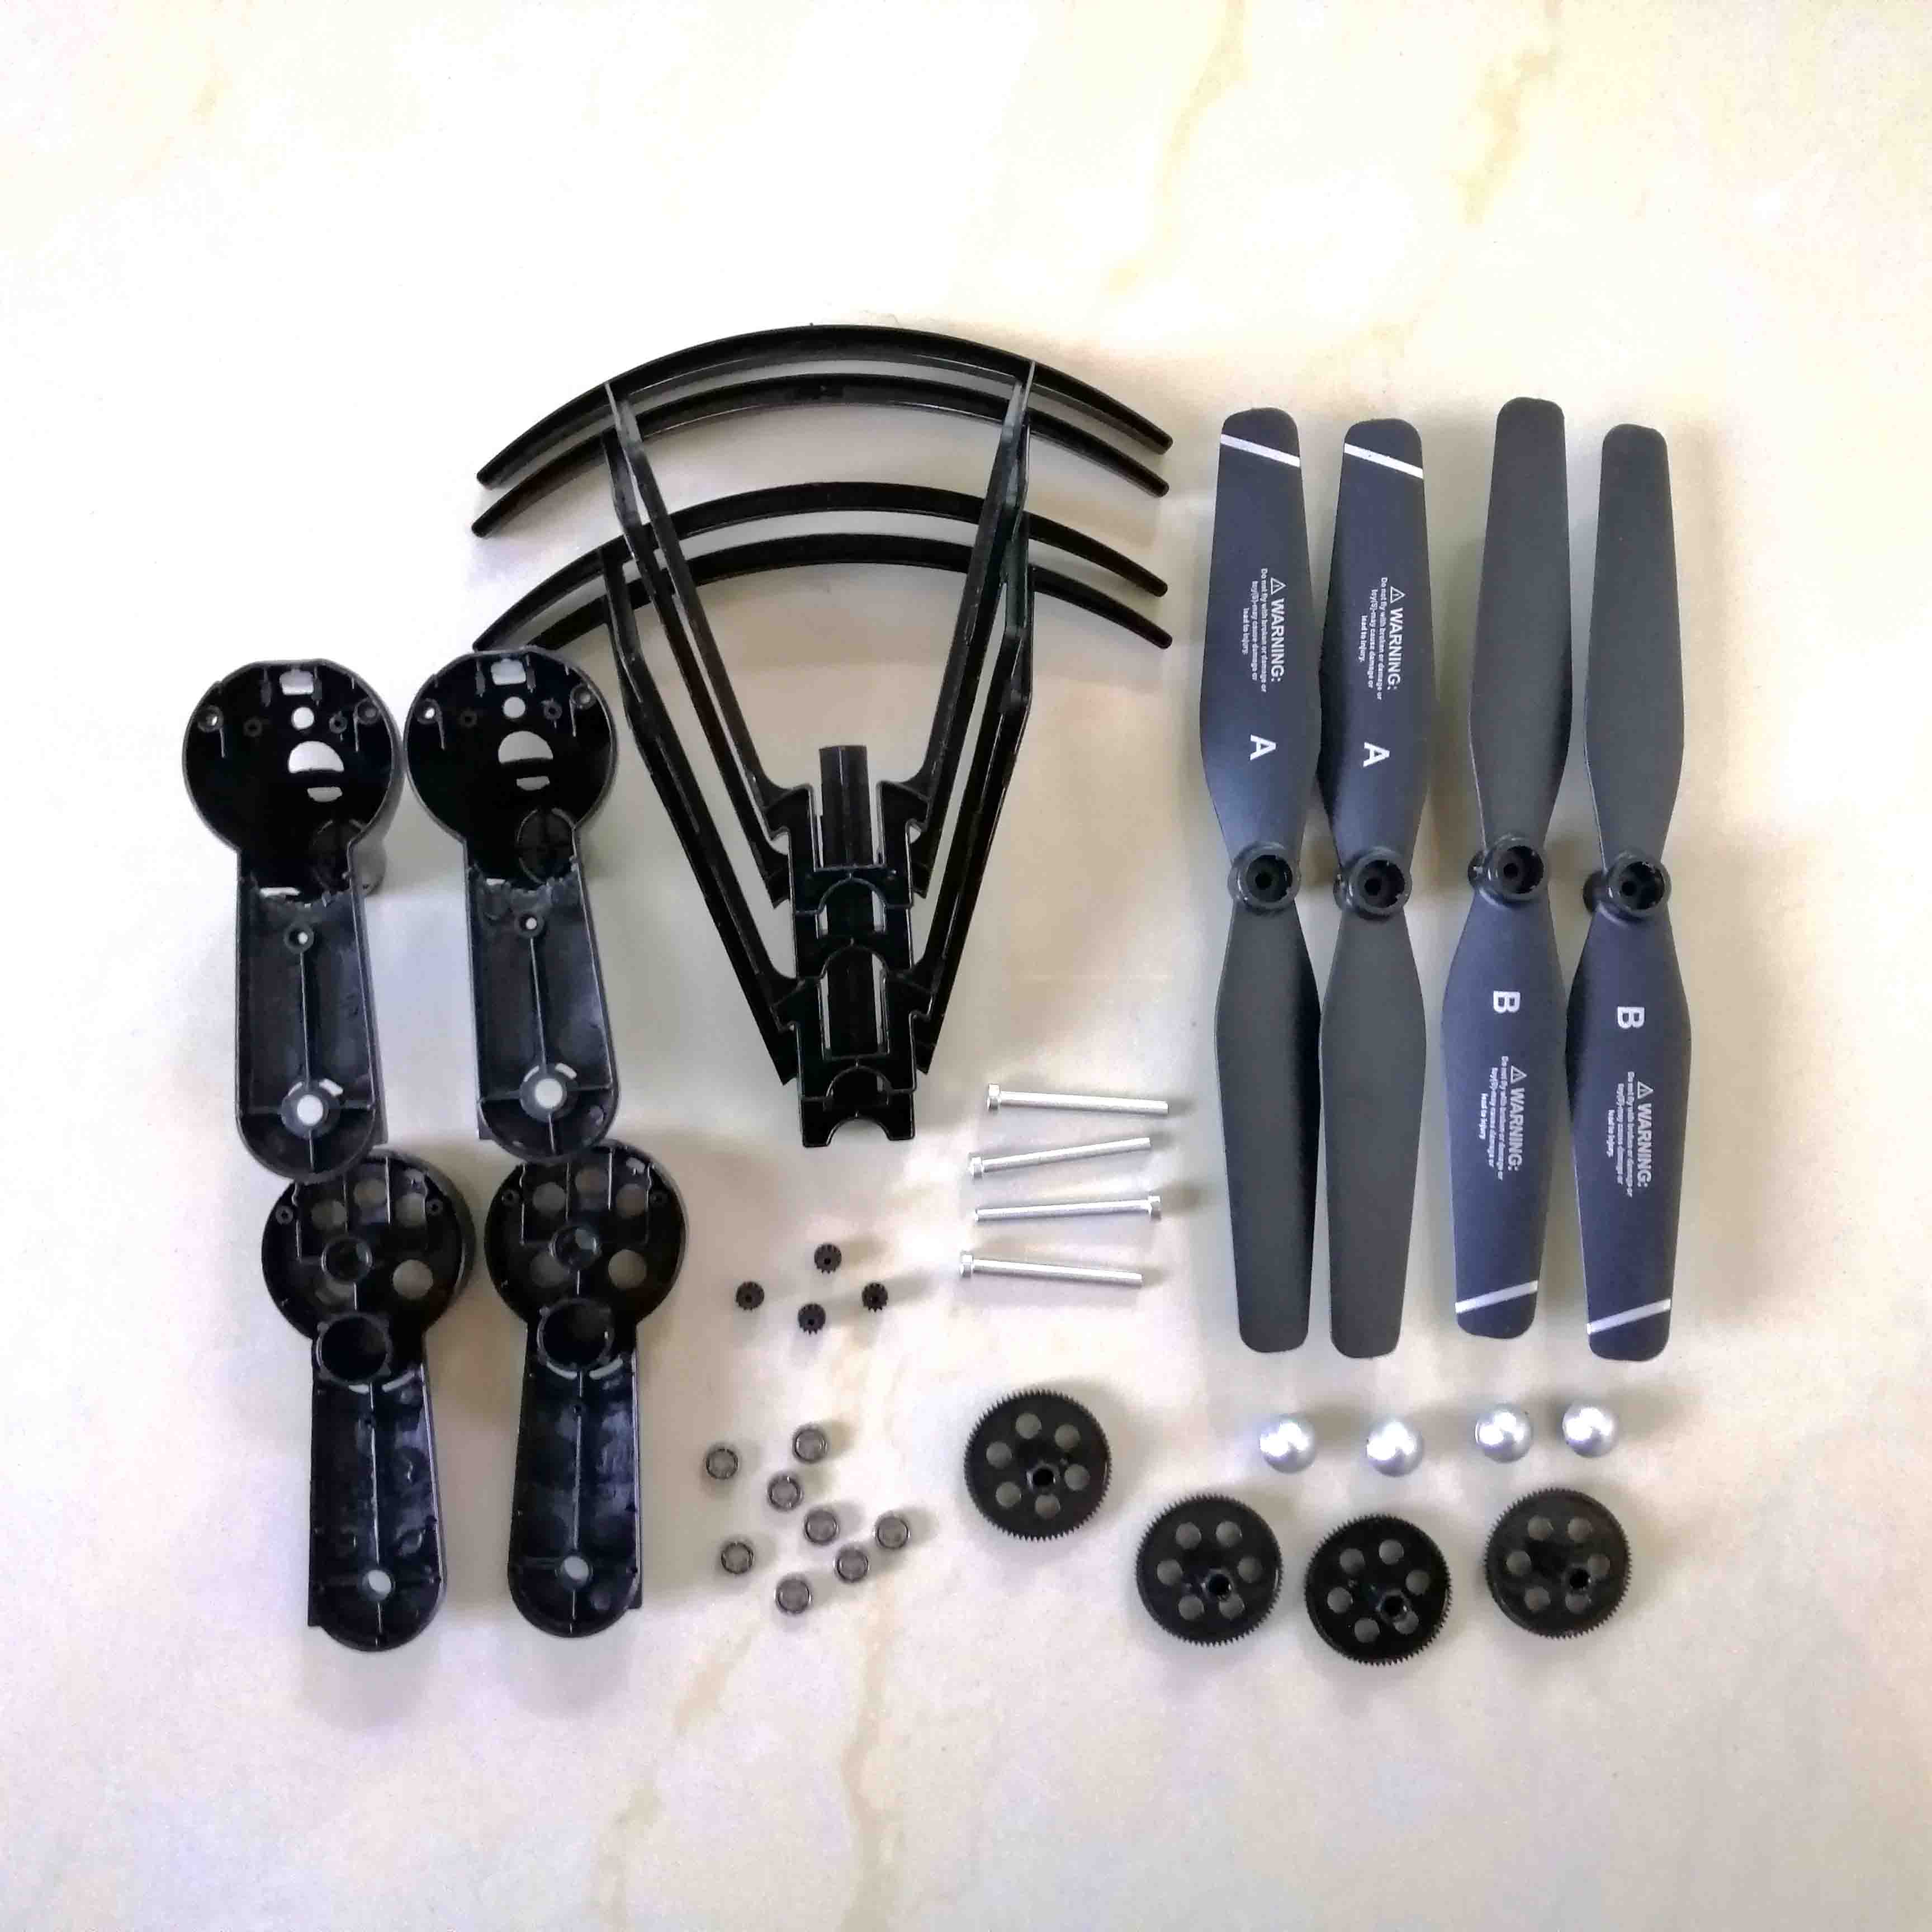 S167 GPS Drone S166GPS S167 RC Quadcopter Spare Parts Arm Aluminum Shaft Gear Propeller Upgrade bearing Crash Pack Set